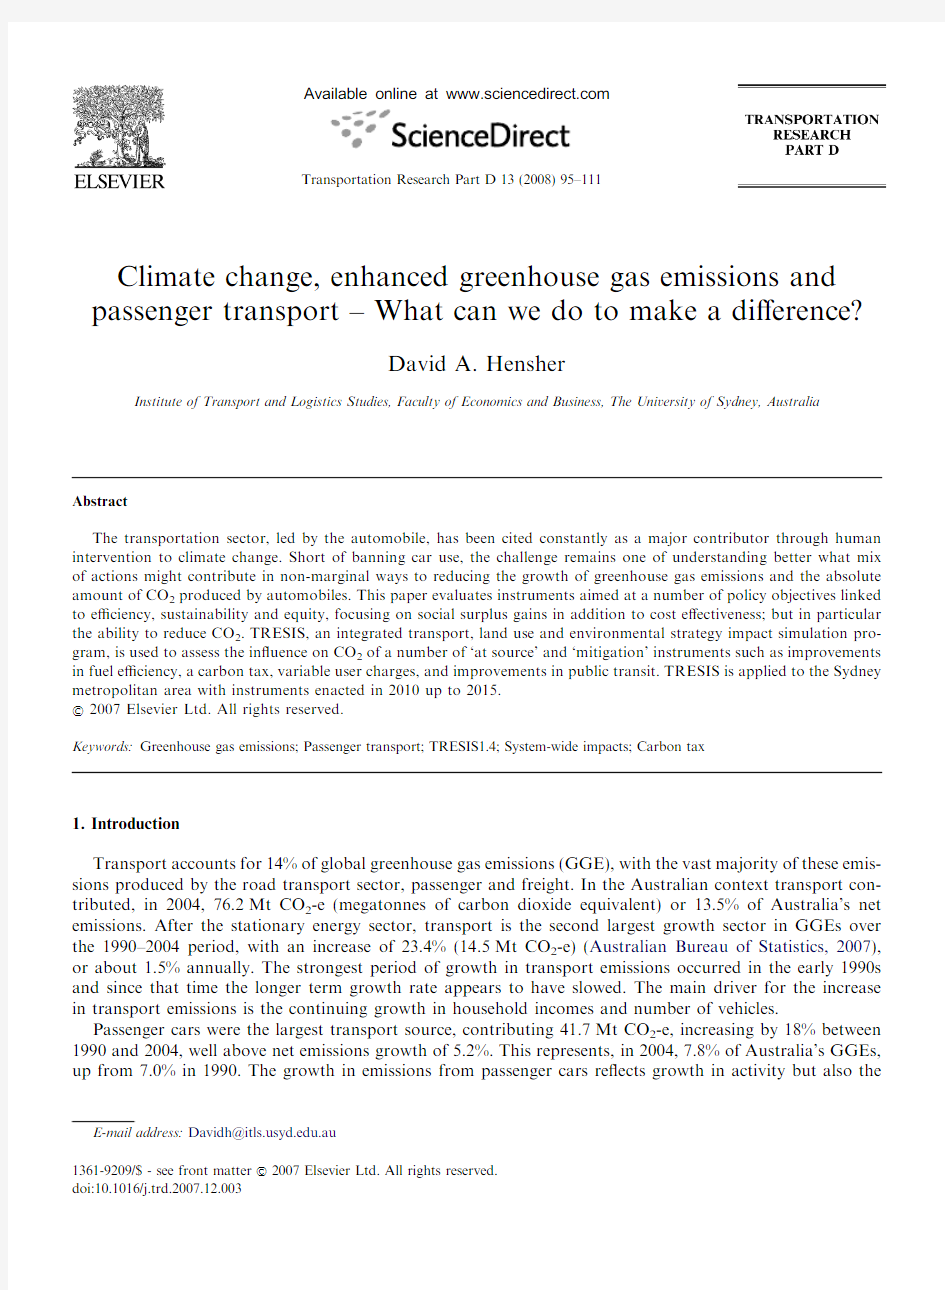 enhanced greenhouse gas emissions and passenger transport – What can we do to make a difference